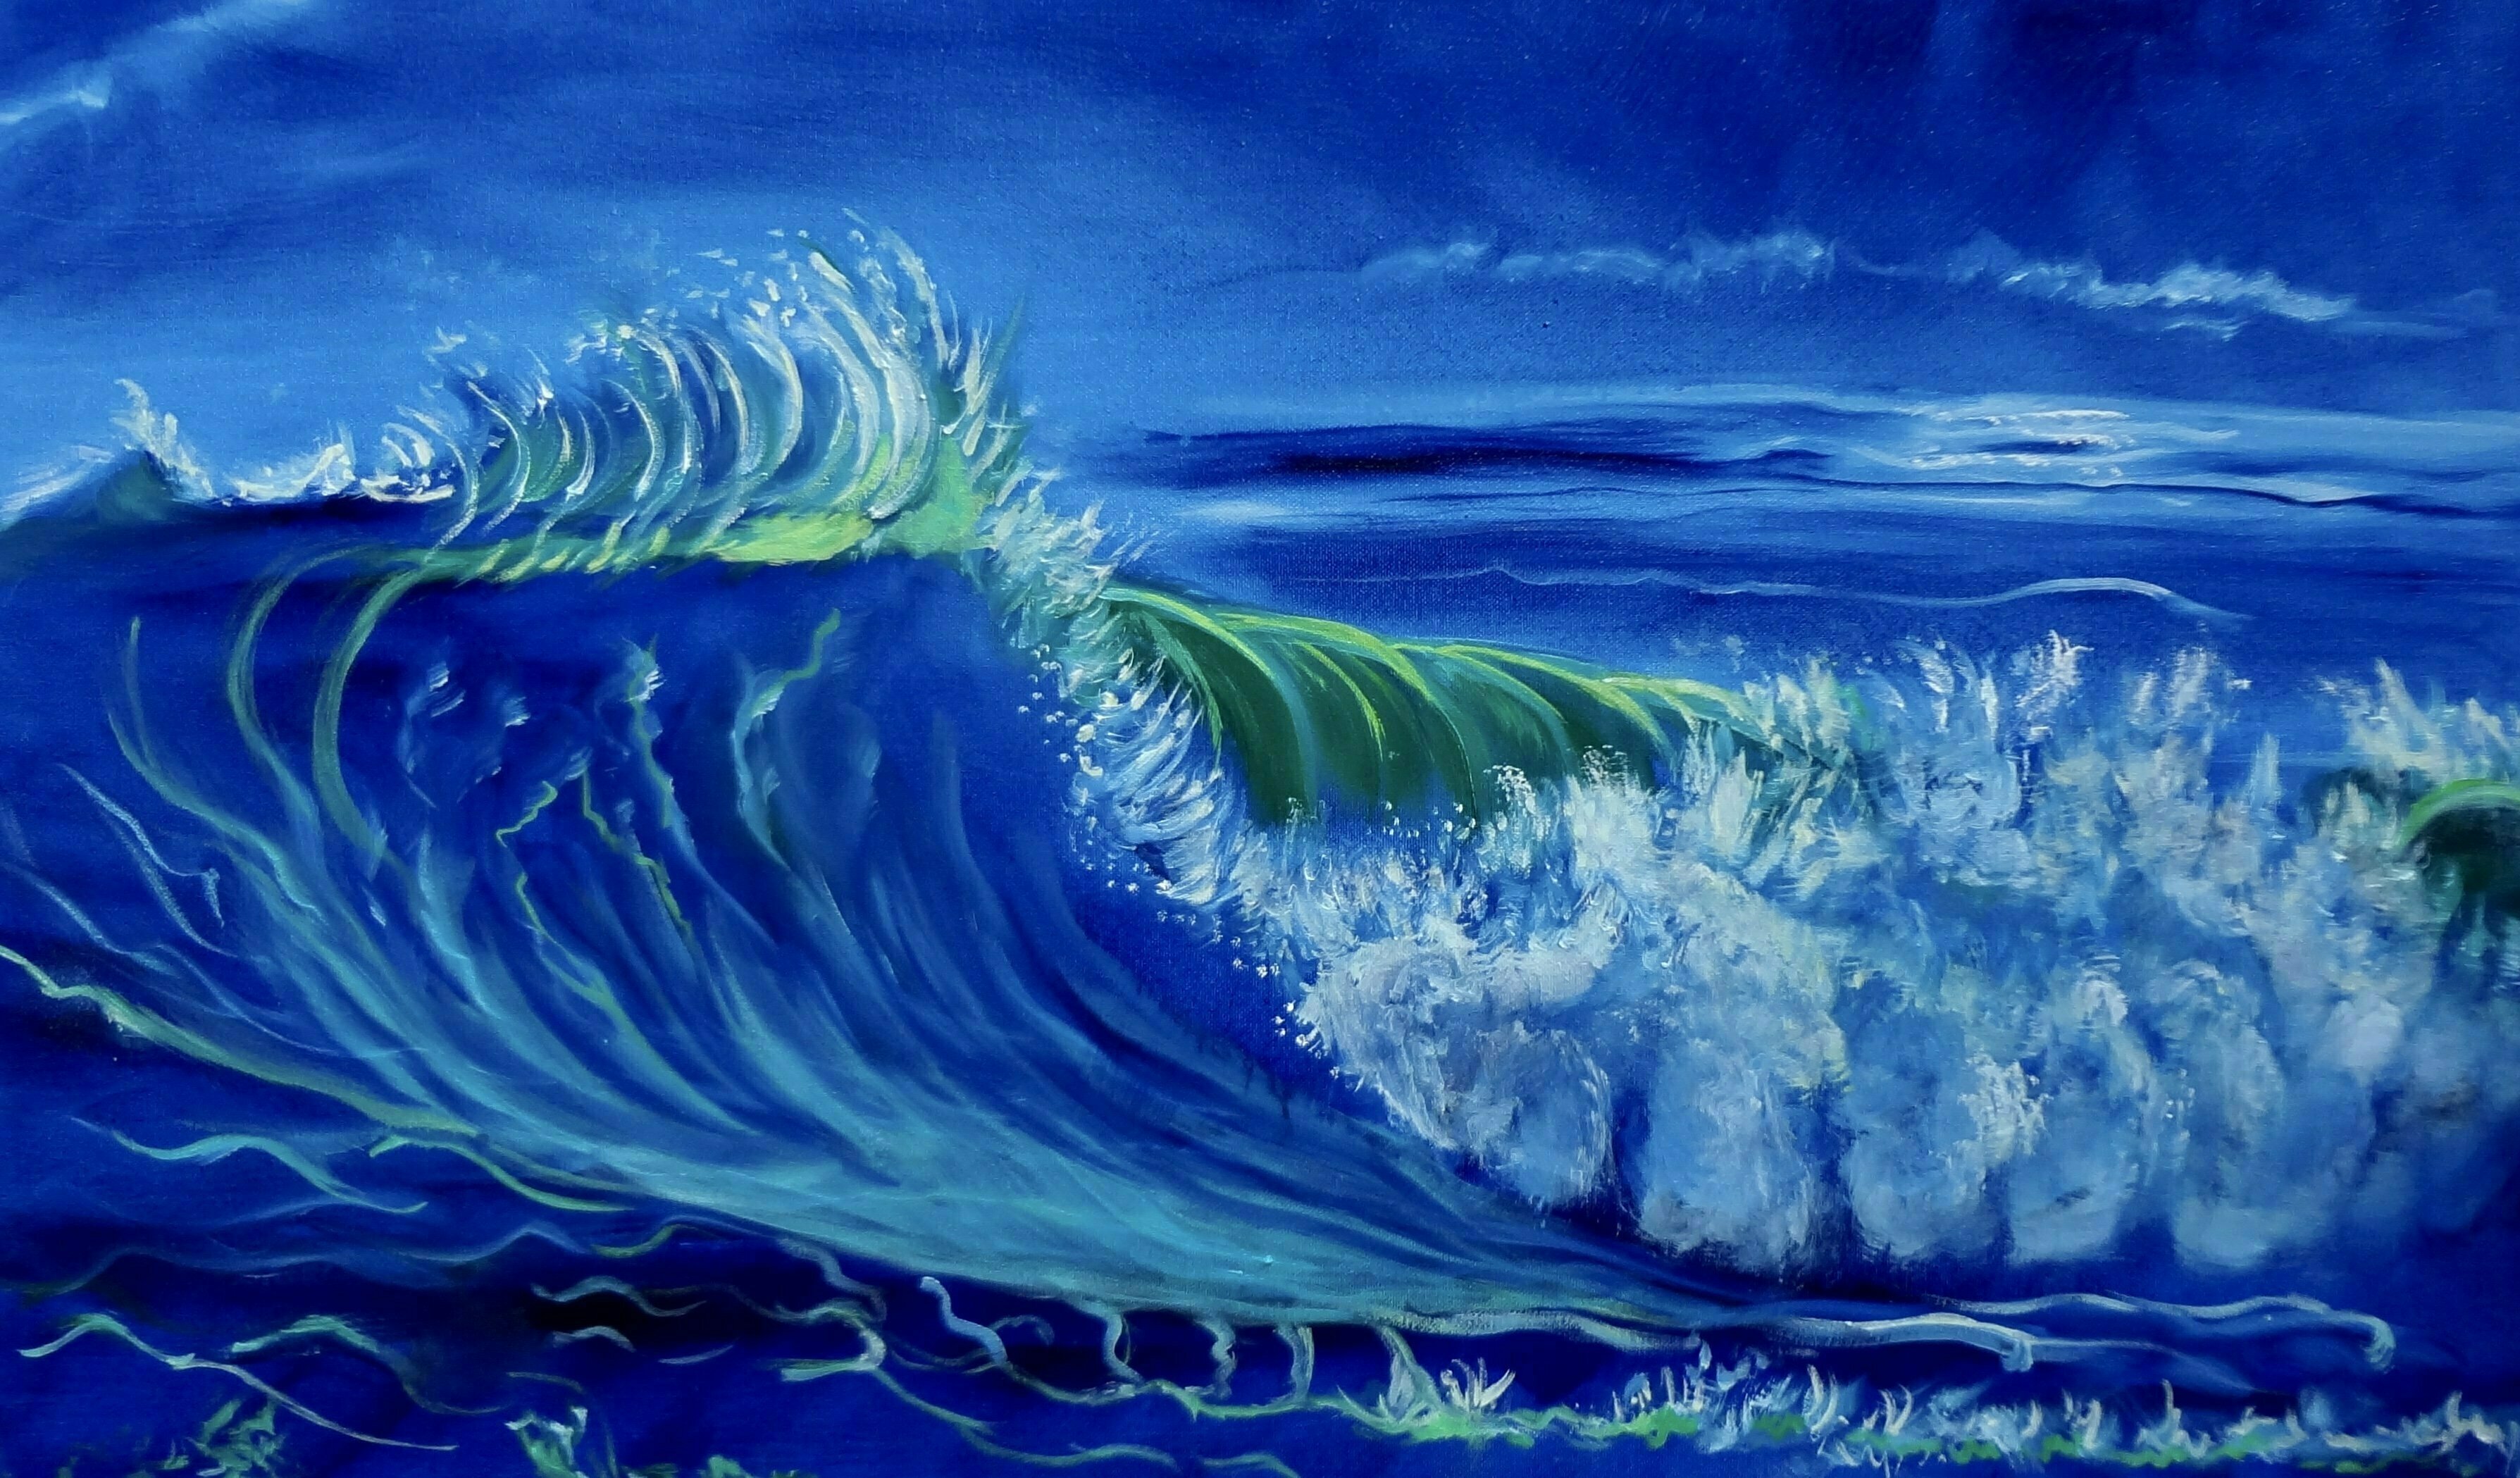 Jenny Jonah; North Shore Oahu Wave, 2019, Original Painting Oil, 32 x 18 inches. Artwork description: 241 Original oil painting on stretched canvas, unframed.  Splashing wves on the tropical shores of Oahu where millions of surfers converge every winter to watch the surfing competitions. ...